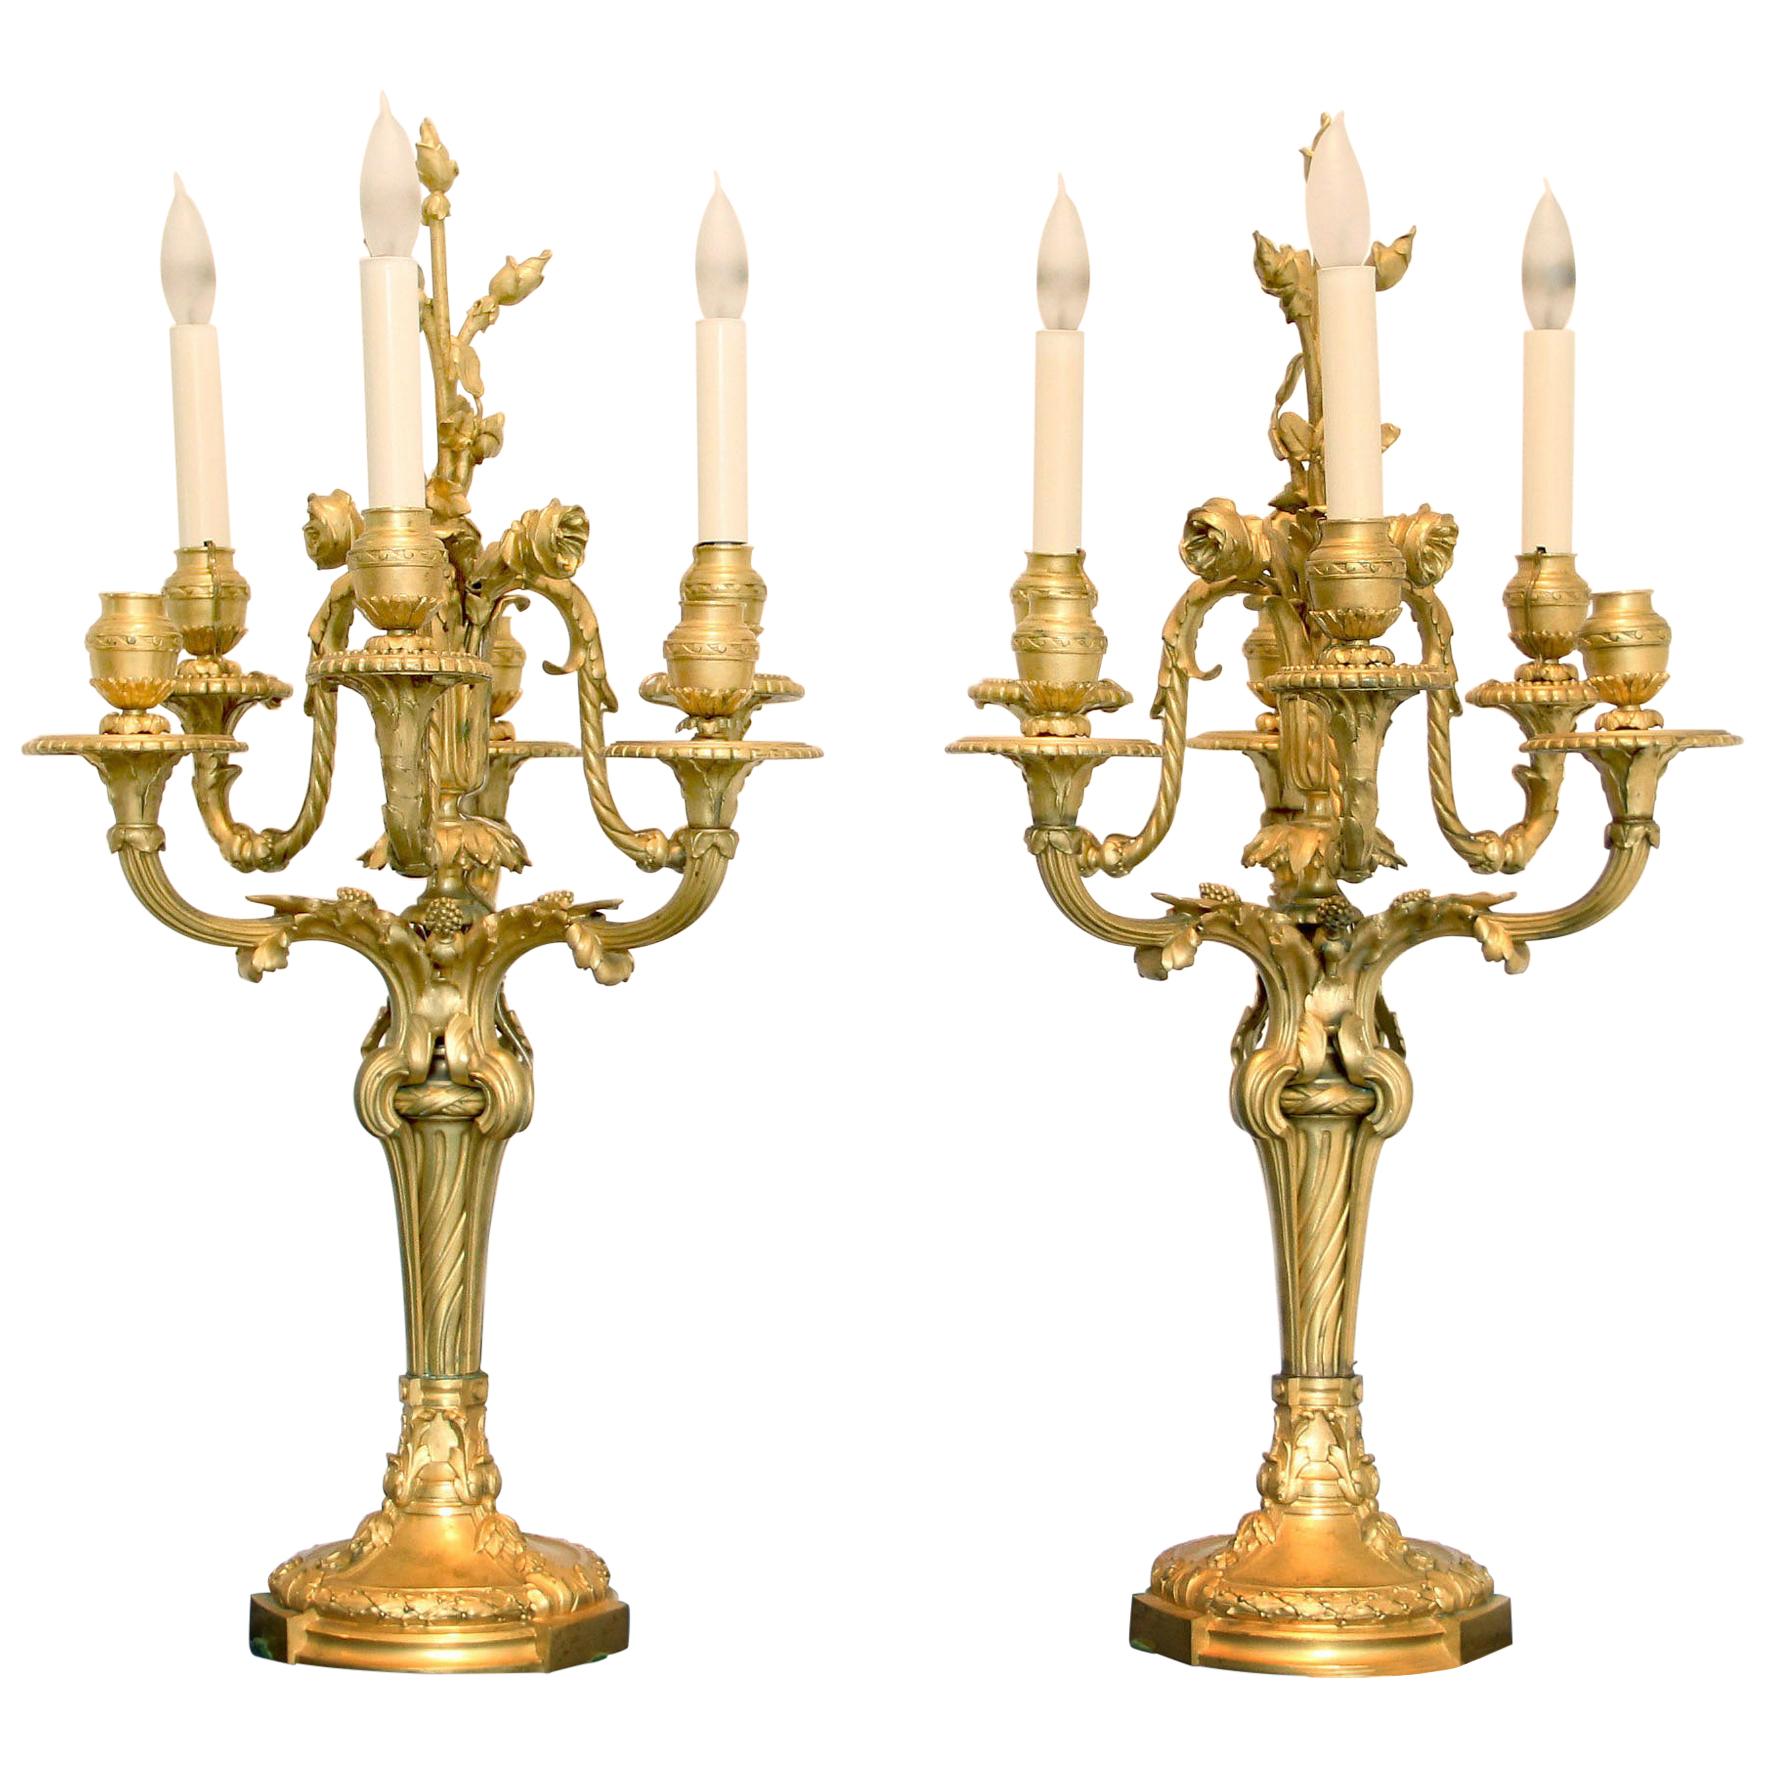 Fantastic Quality Pair of Late 19th Century Gilt Bronze Six-Arm Candelabra For Sale